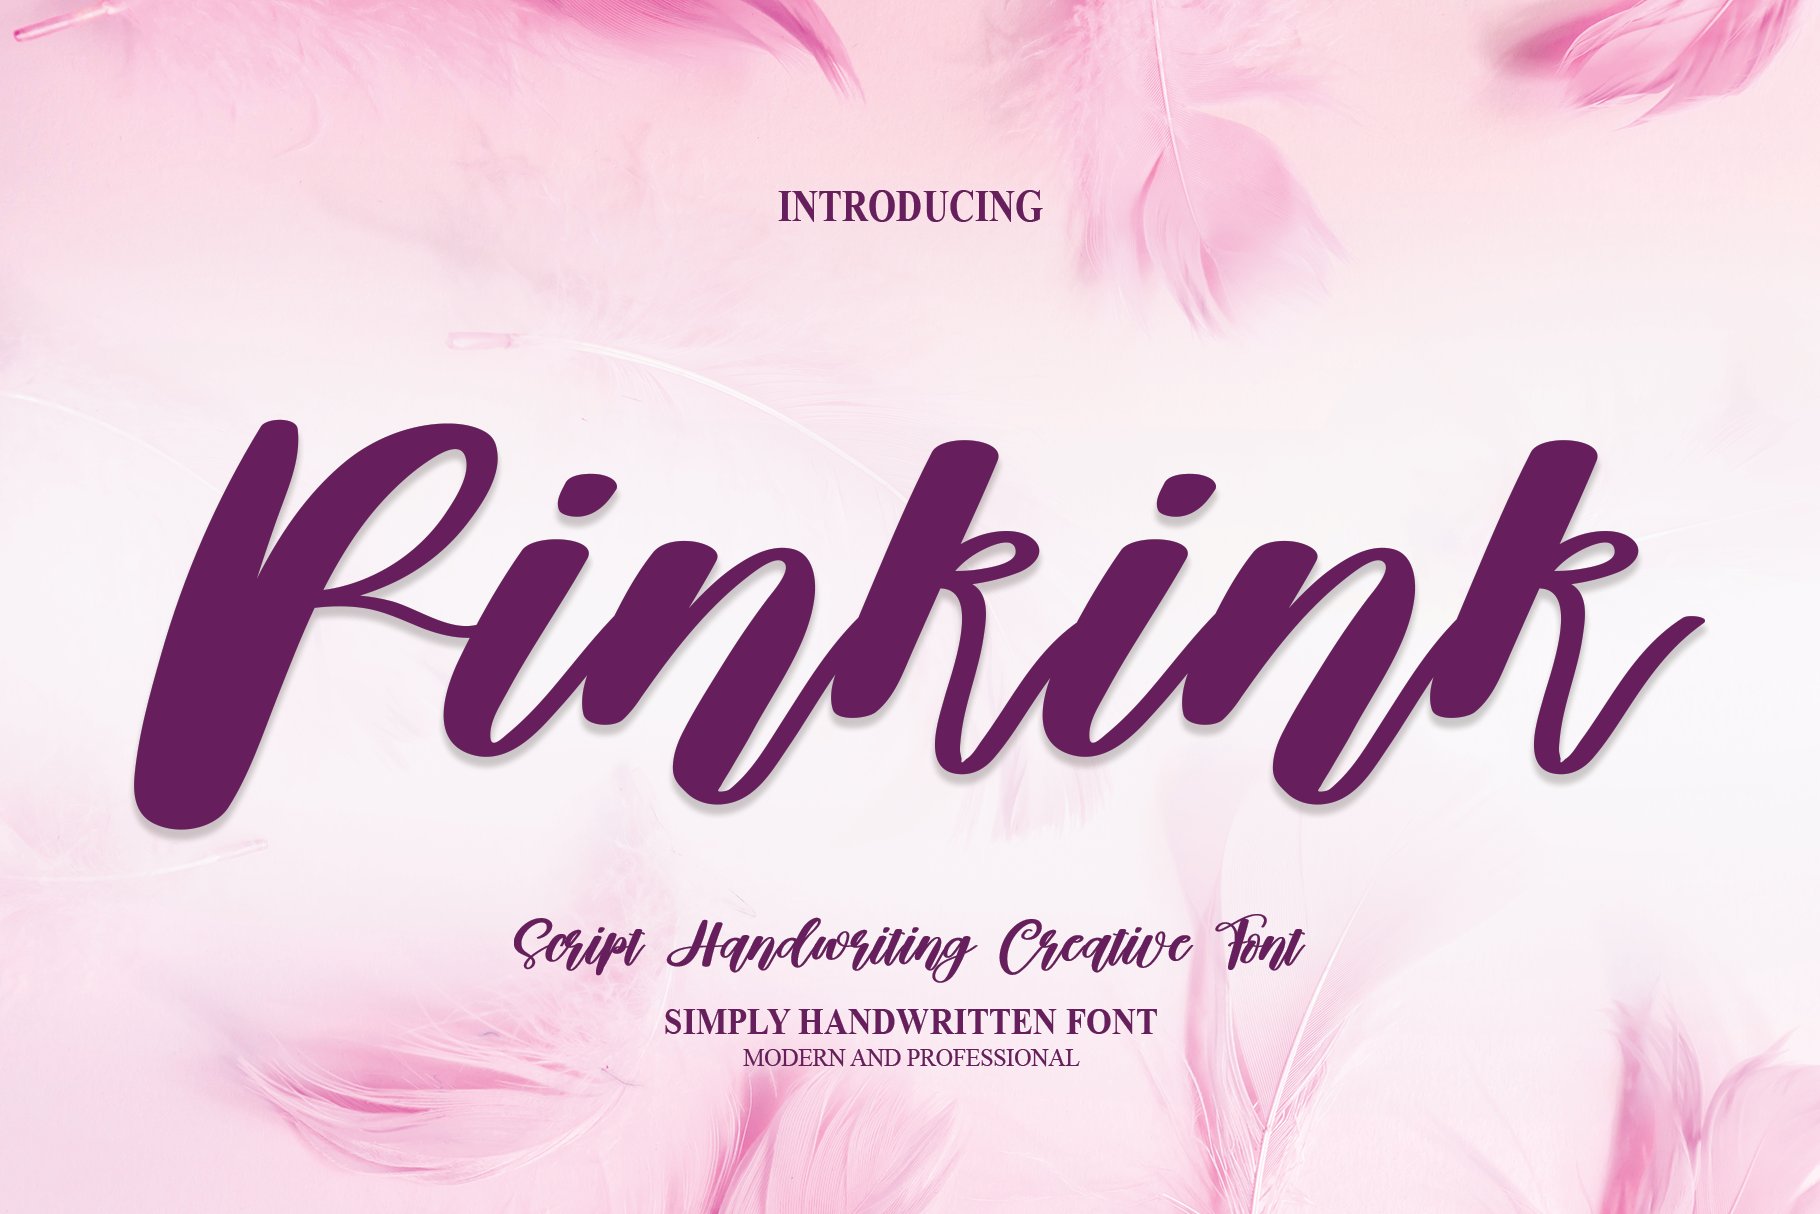 Pinkink | Script Font cover image.